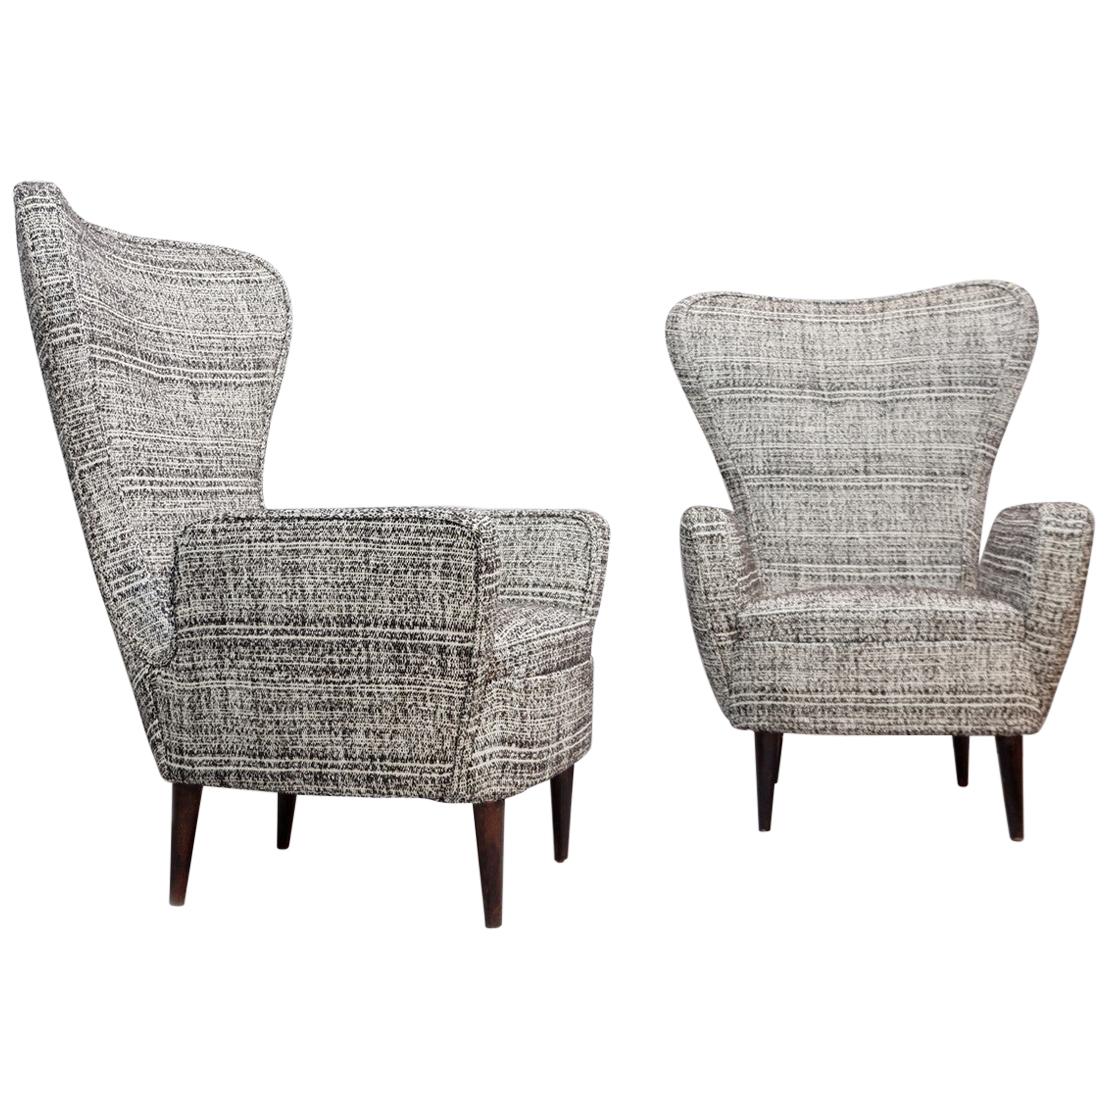 Pair of Armchairs by Emilio Sala and Giorgio Madini, New Upholstery